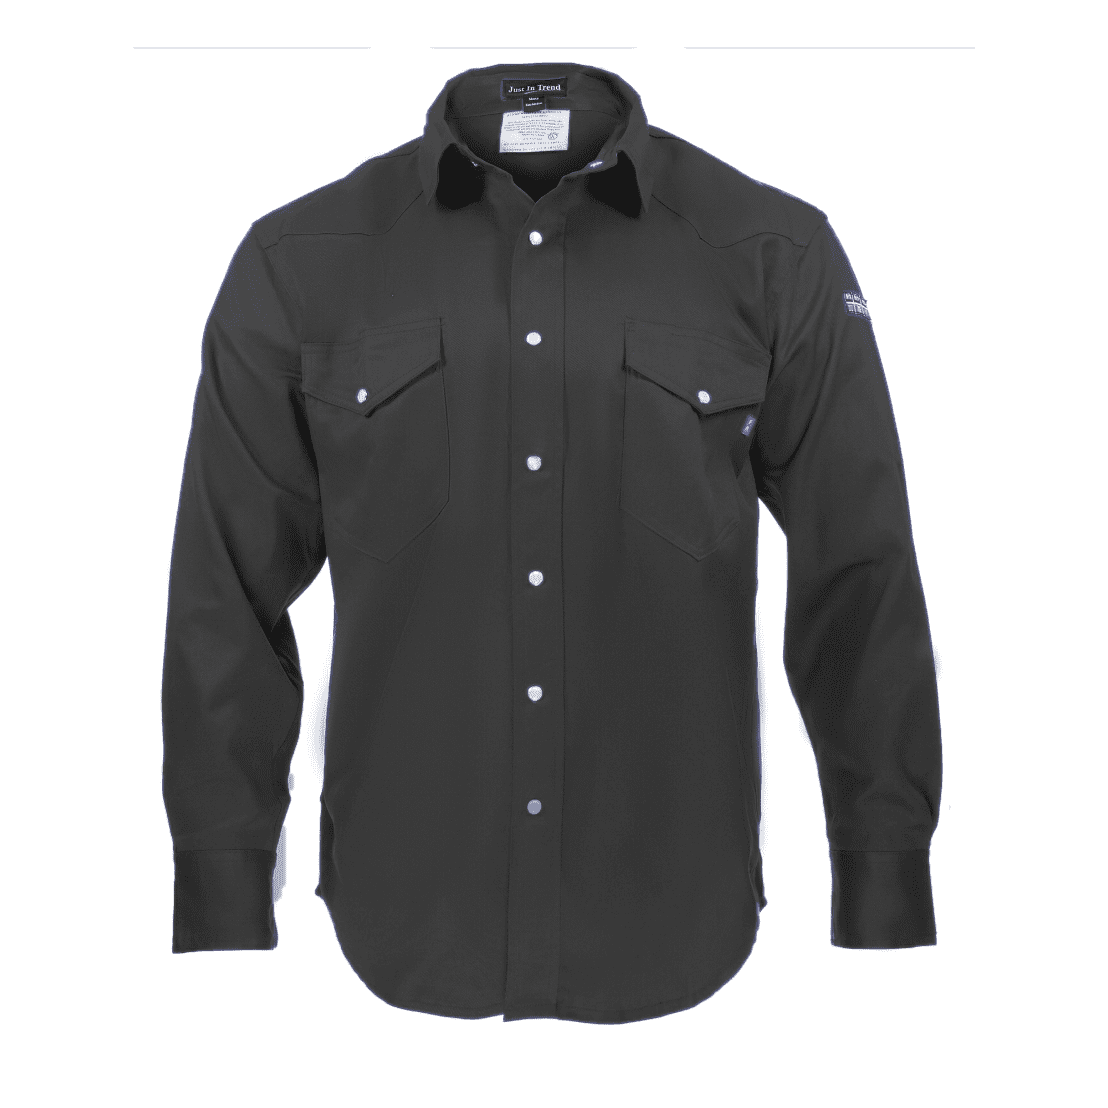 100% Cotton Heavy Weight Flame Resistant FR Welding Shirt 9 oz 